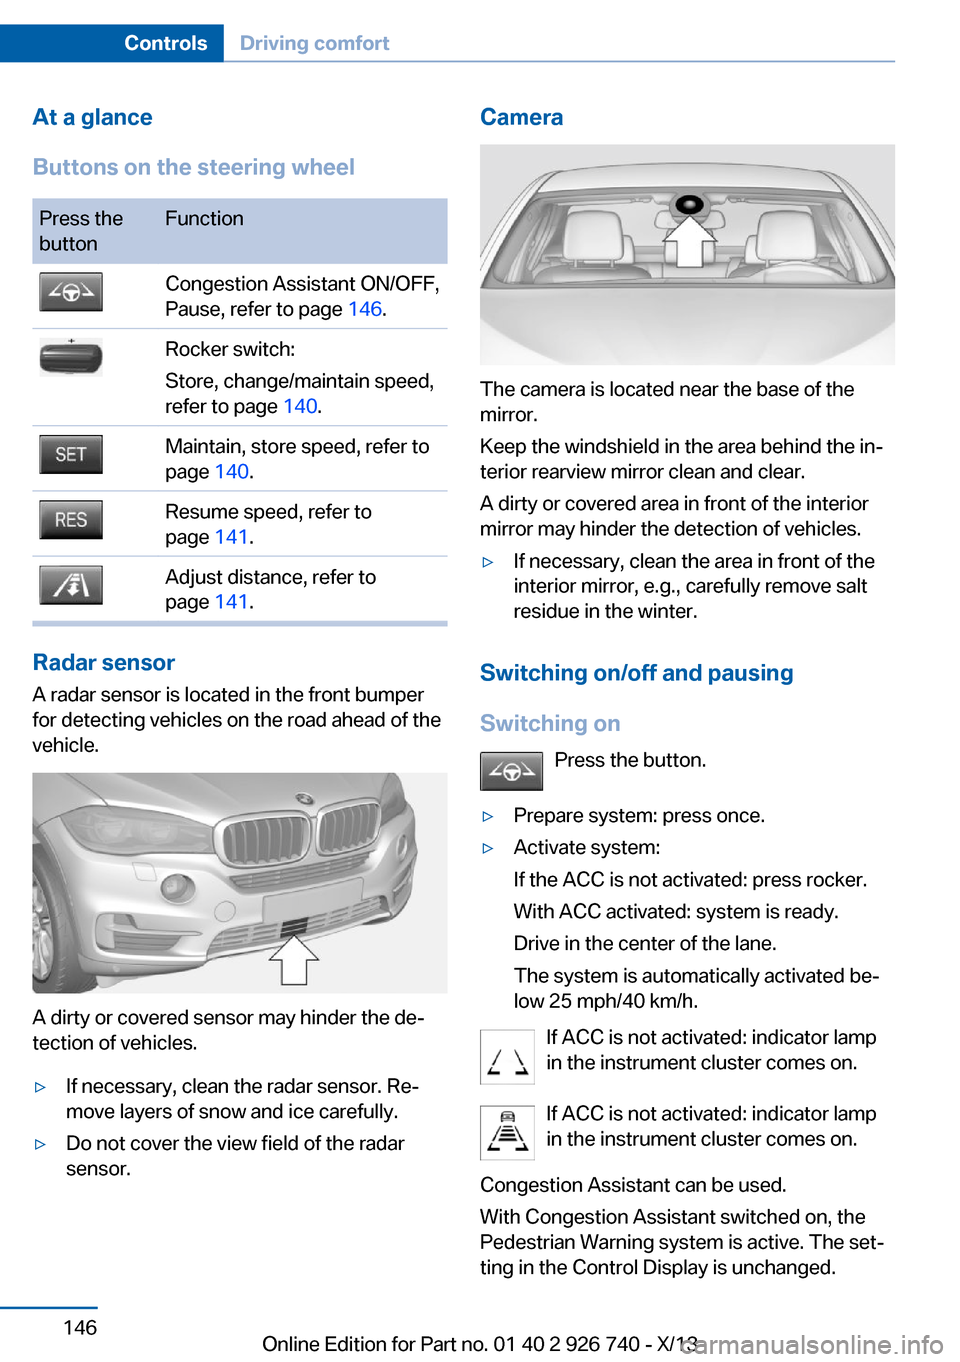 BMW X5 2014 F15 Owners Manual At a glance
Buttons on the steering wheelPress the
buttonFunctionCongestion Assistant ON/OFF,
Pause, refer to page  146.Rocker switch:
Store, change/maintain speed,
refer to page  140.Maintain, store 